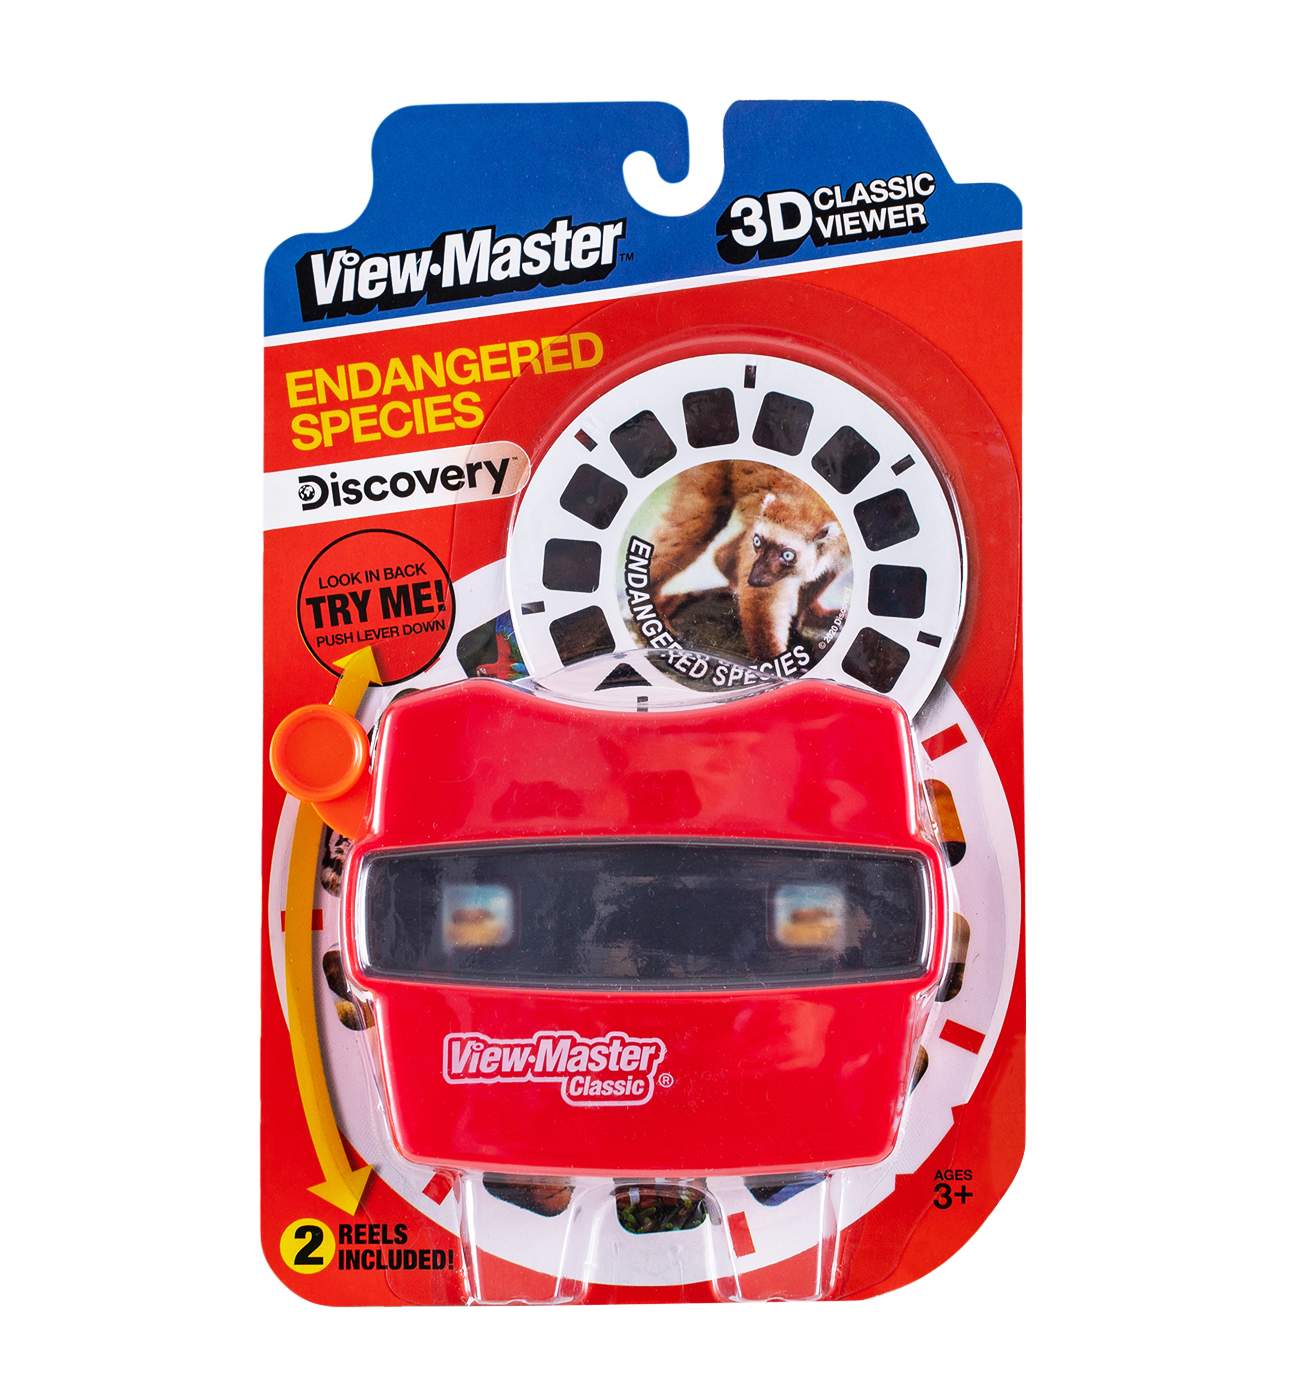 View Master 3D Classic Viewer – Discovery Endangered Species